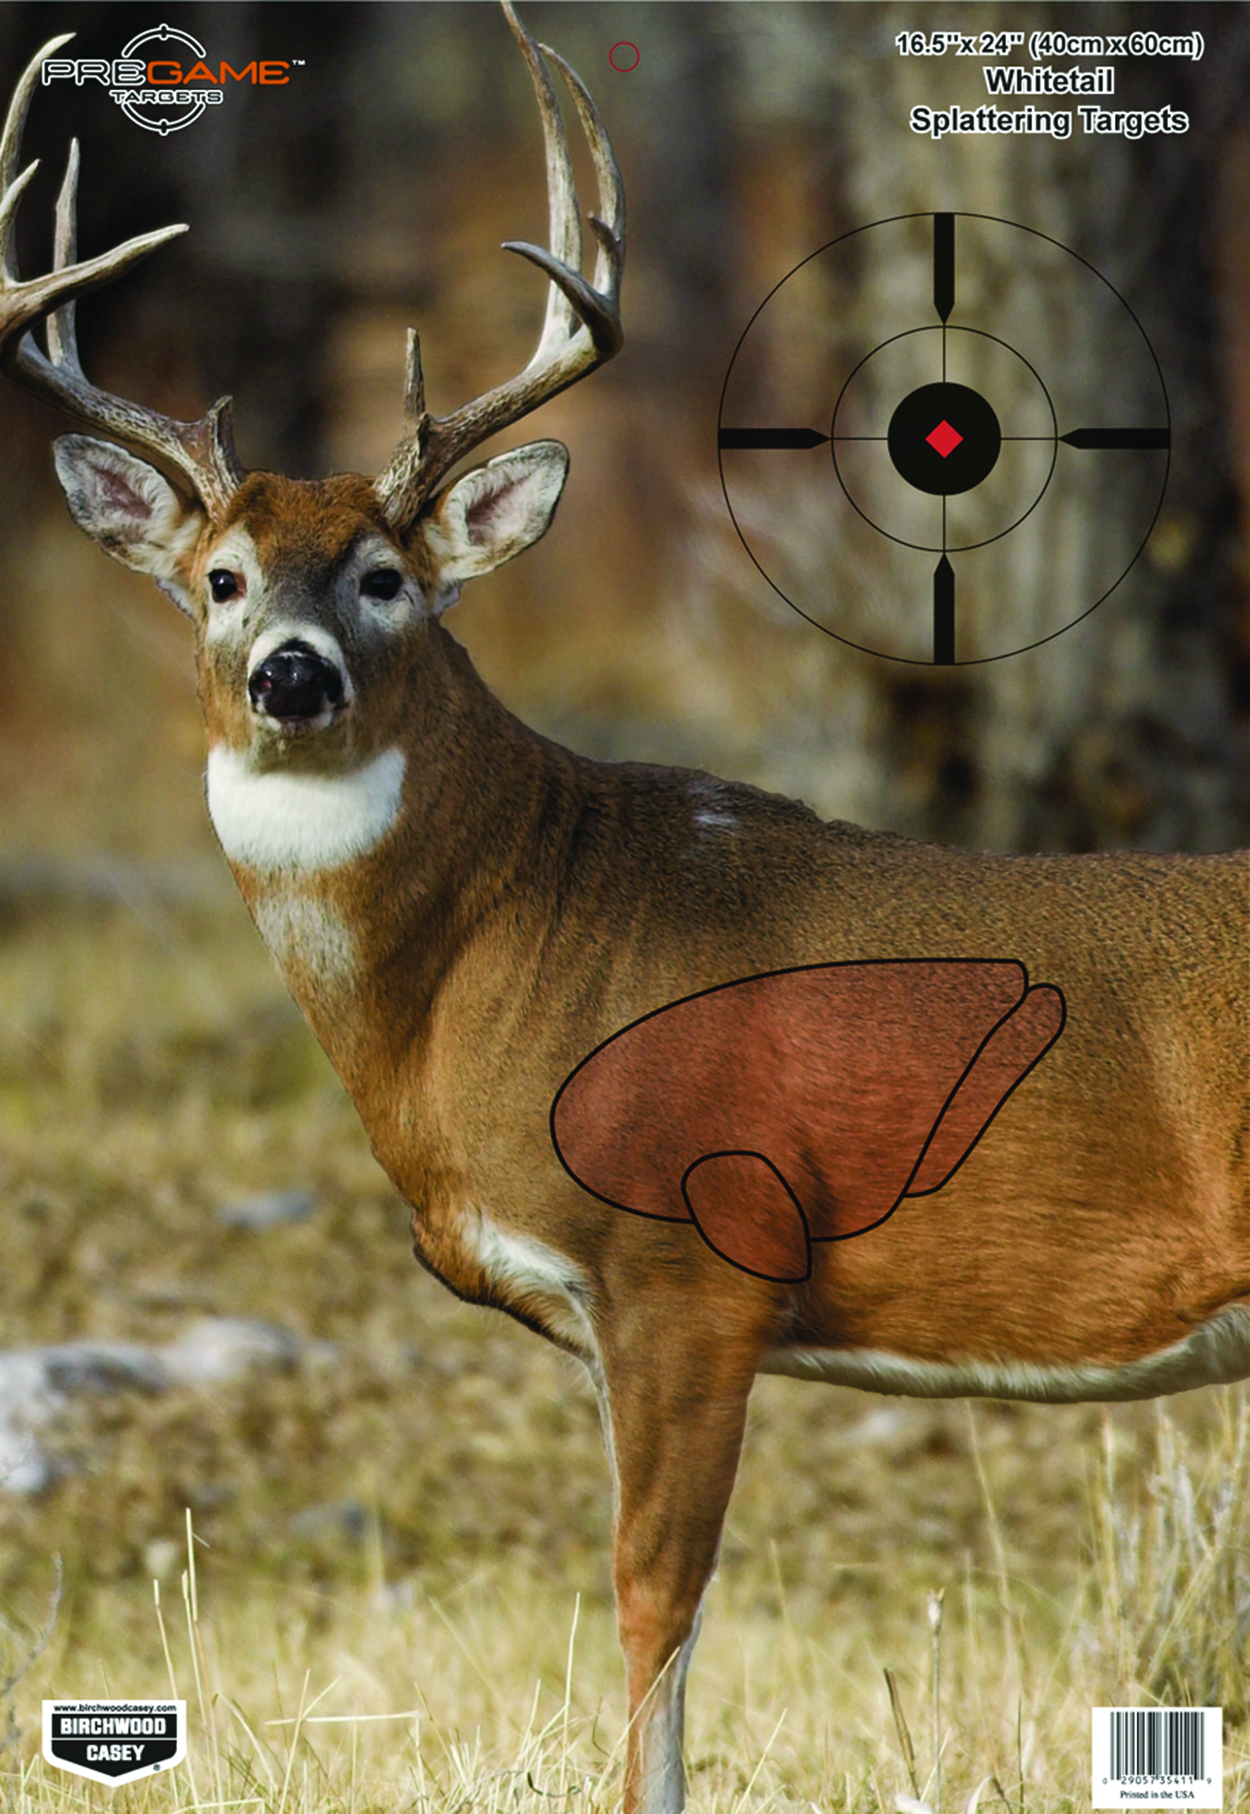 sight in for the upcoming season with pregame splattering targets from